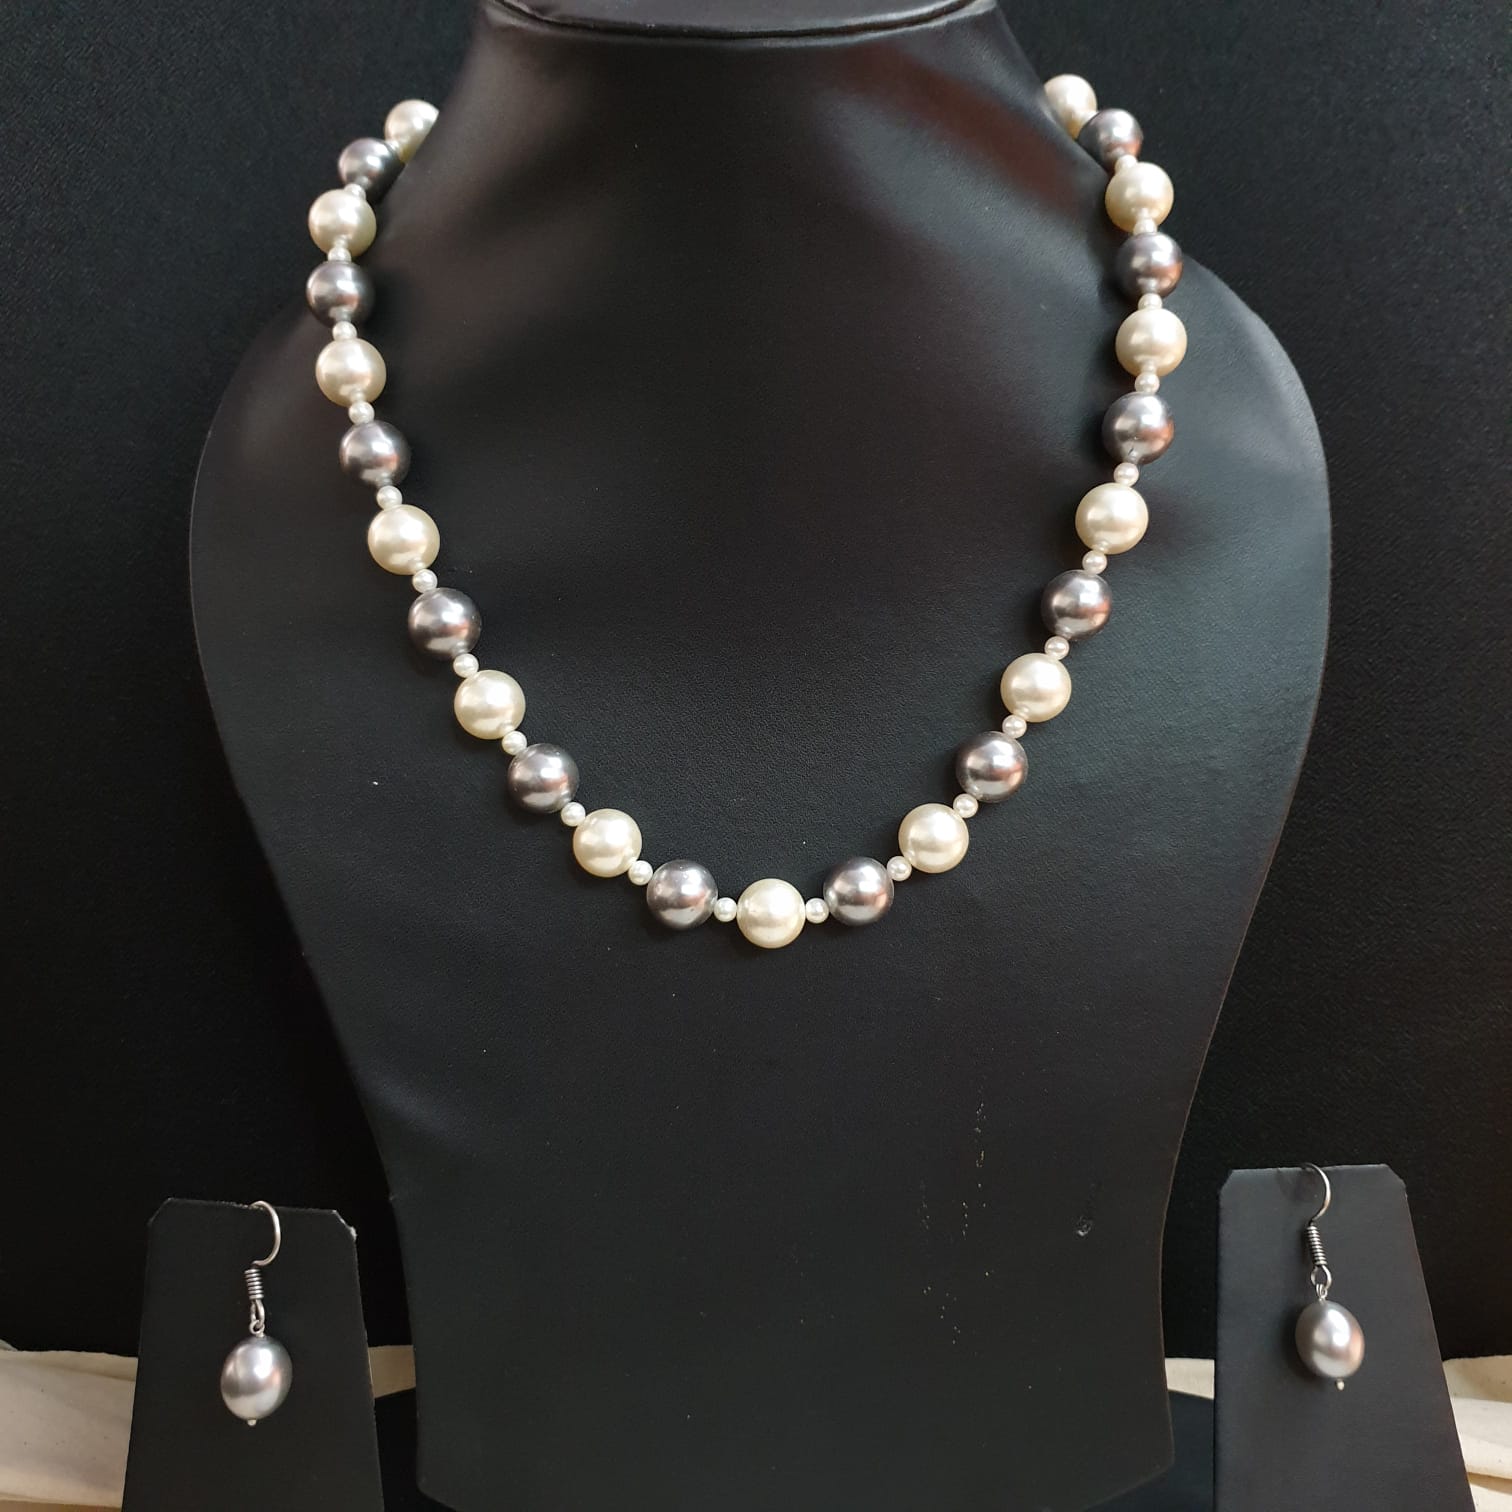 Off White and Grey Round Pearl Necklace